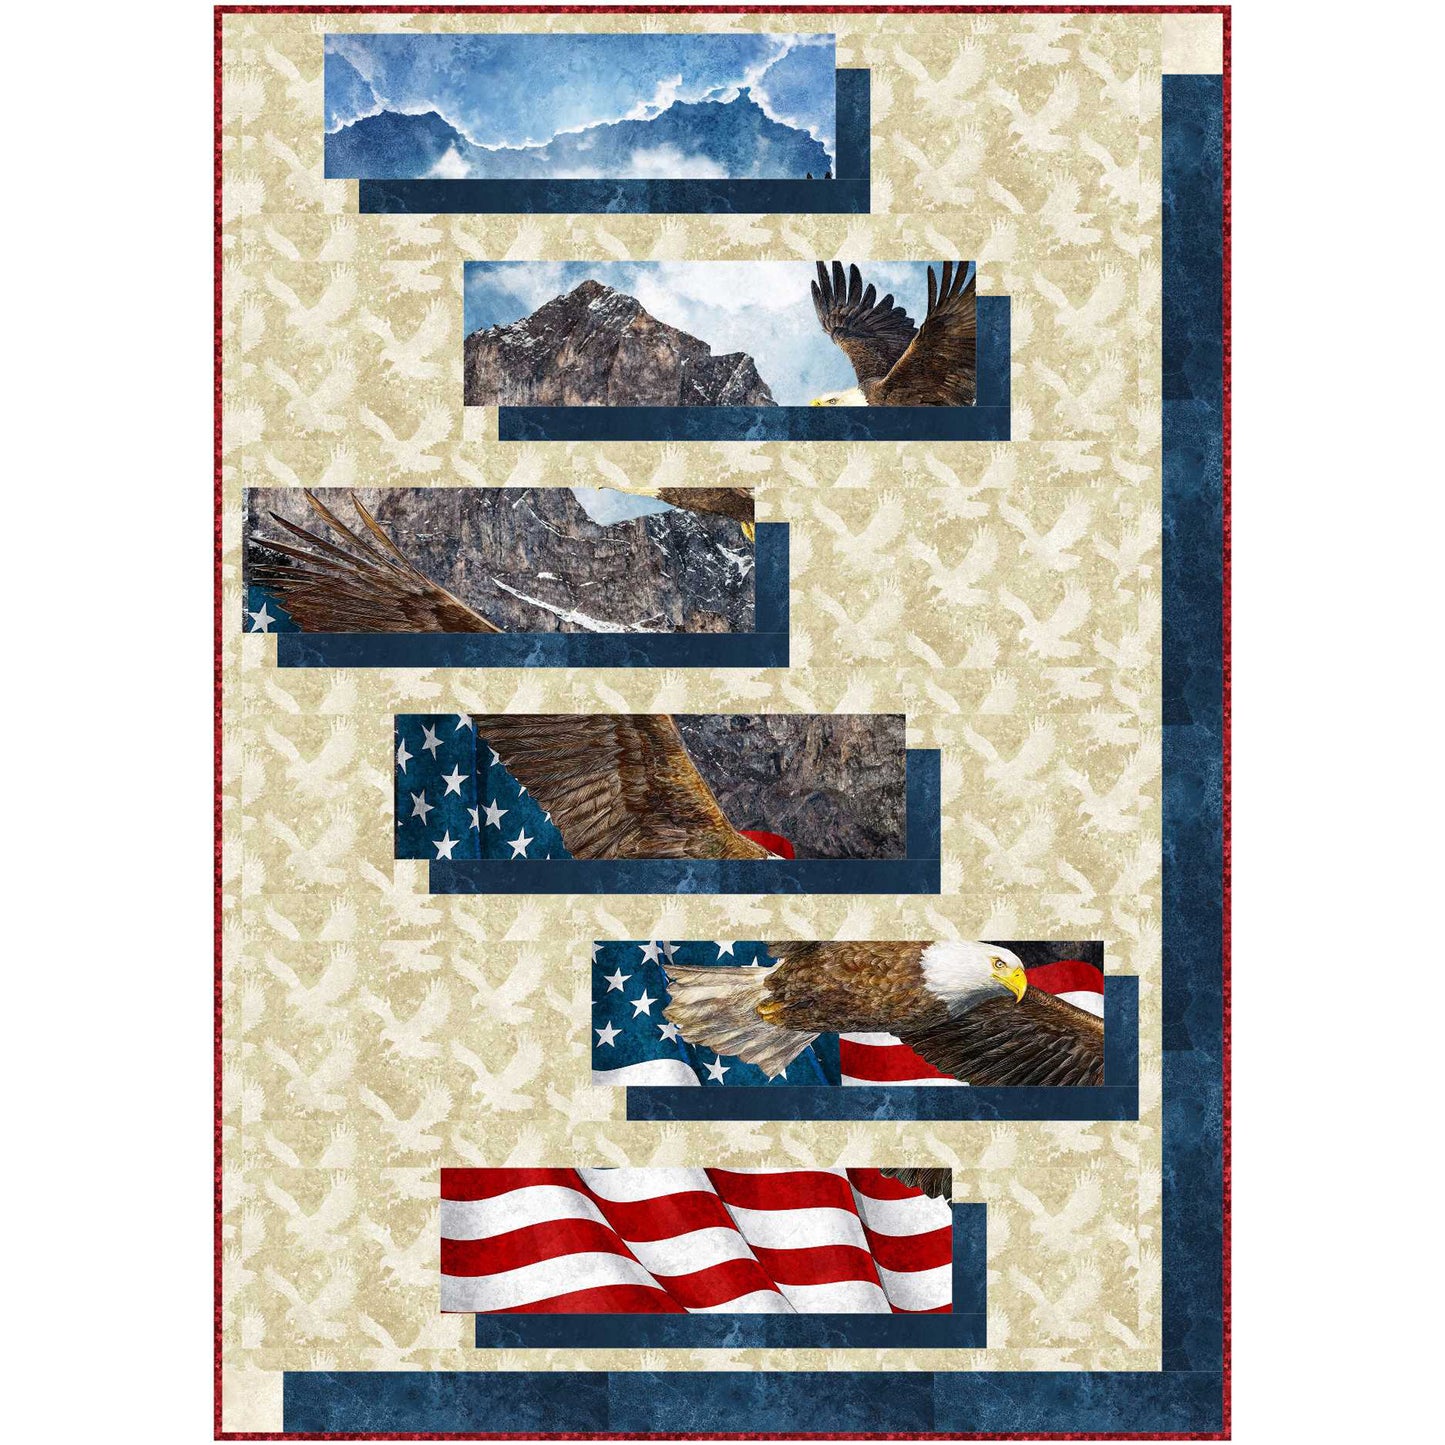 Eagle and American flag quilt features an eagle and flag print cut up with blue fabric below each rectangle to make it look shaded. On cream background fabric with shadows of eagles. Artistic way to showcase a panel image.